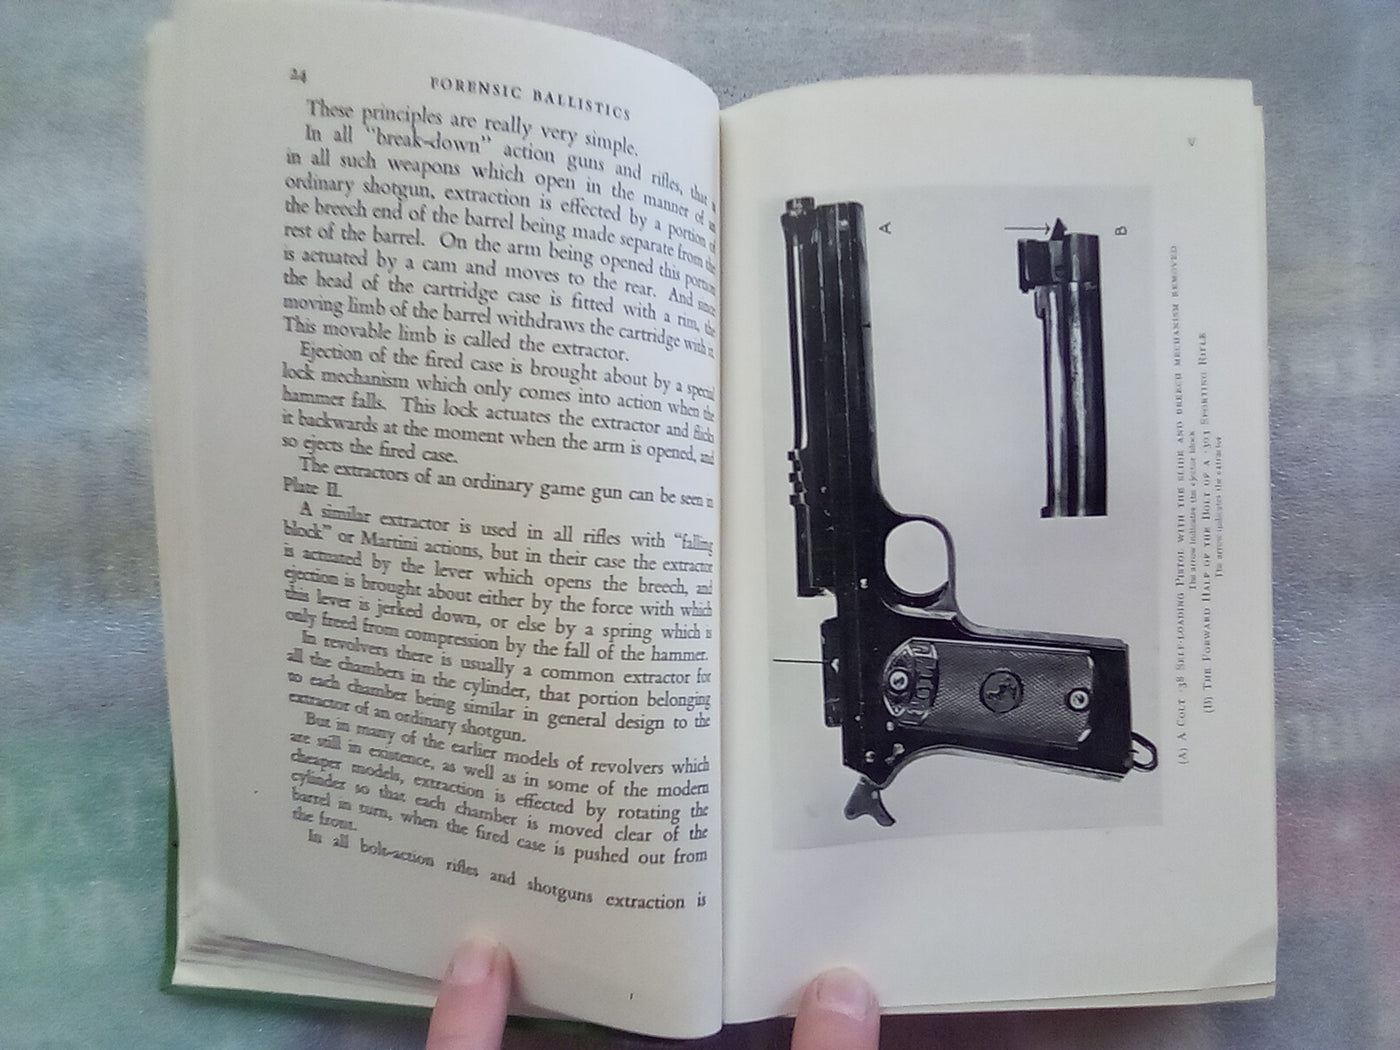 The Identification of Firearms and Forensic Ballistics by Major Sir Gerald Burrard B.T. D.S.O.